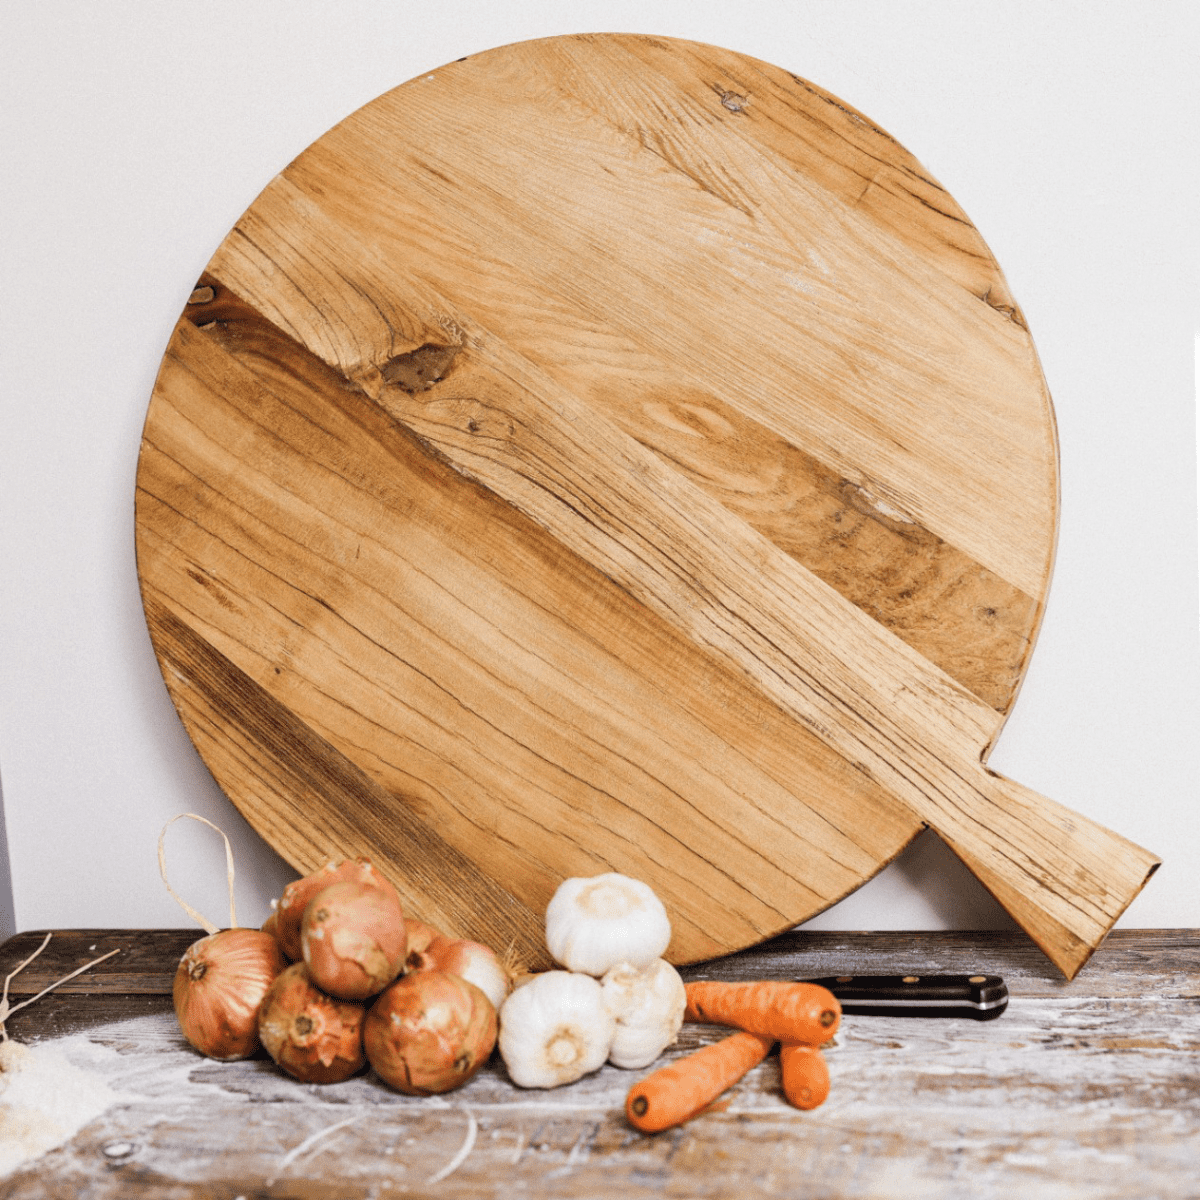 Circular wooden chopping board with handle against a wall with vegetables and a knife in front.